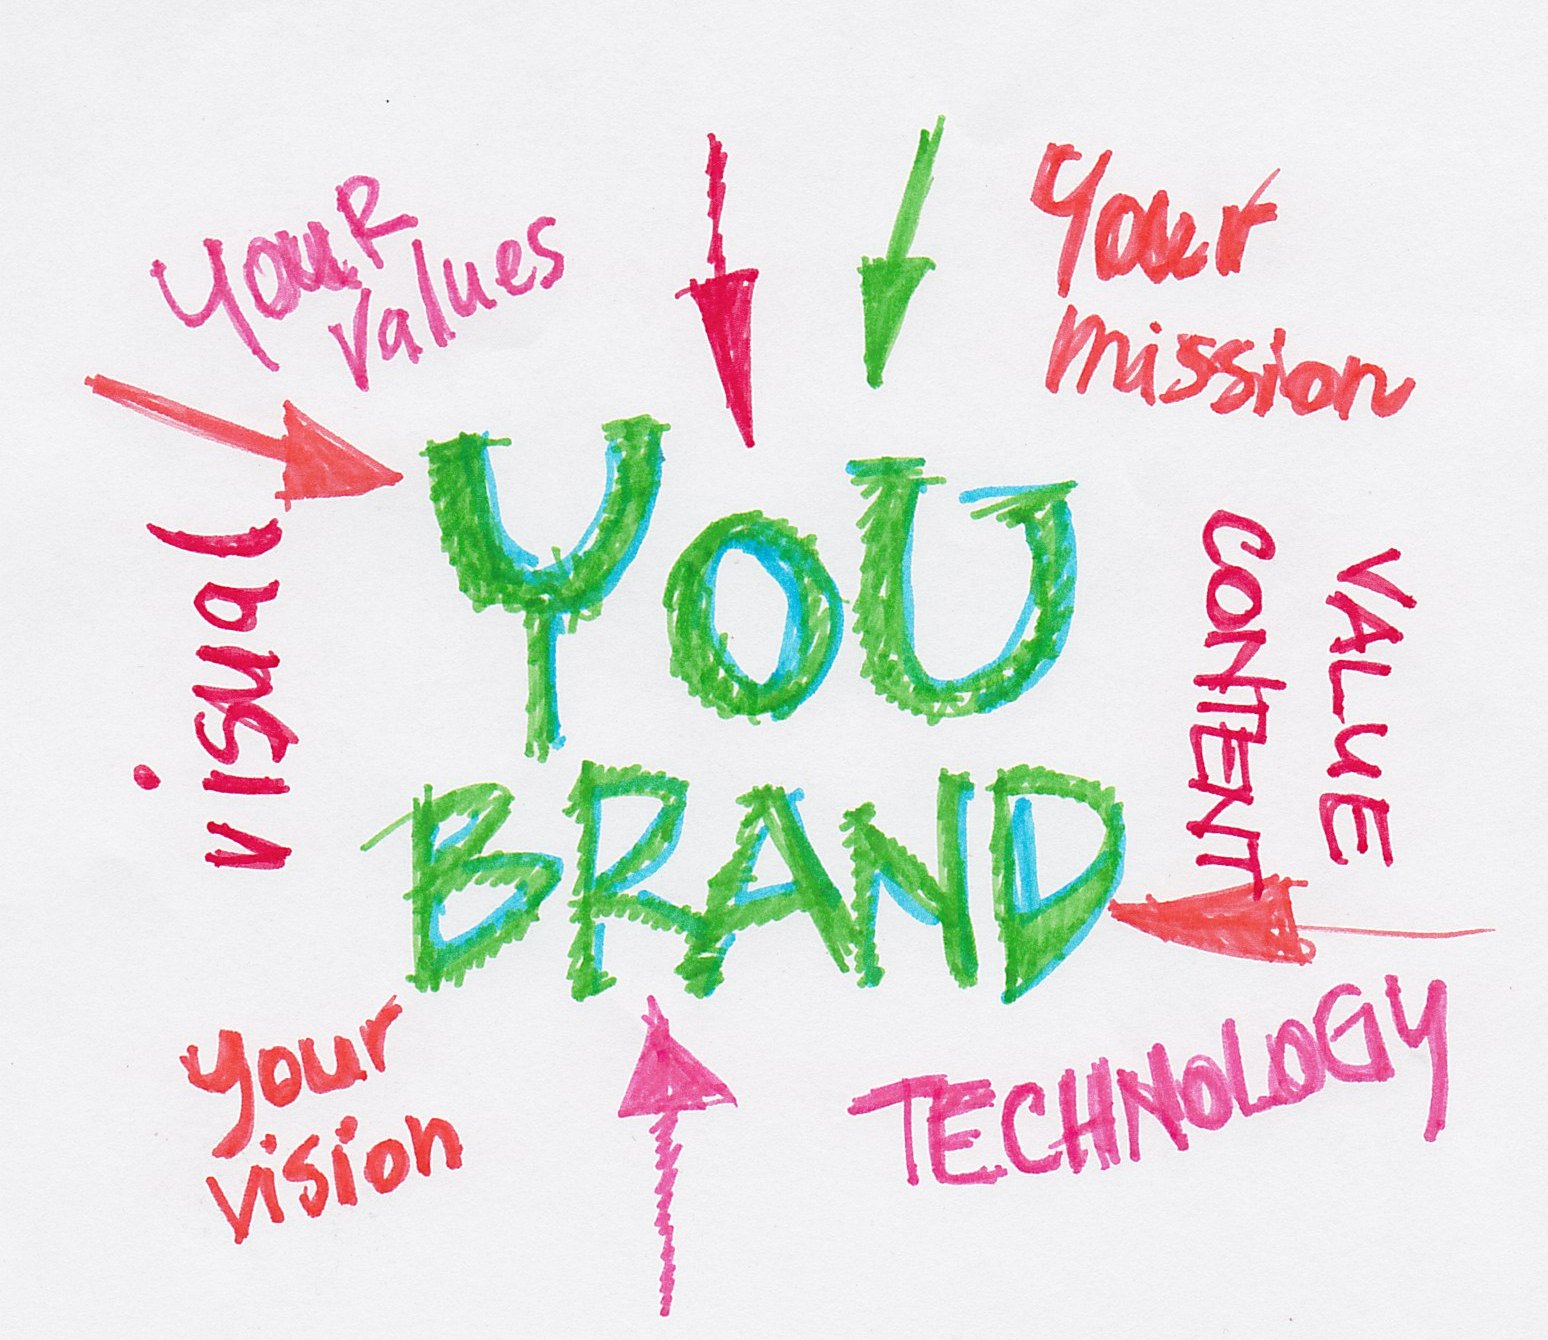 Branding Tips and Trends